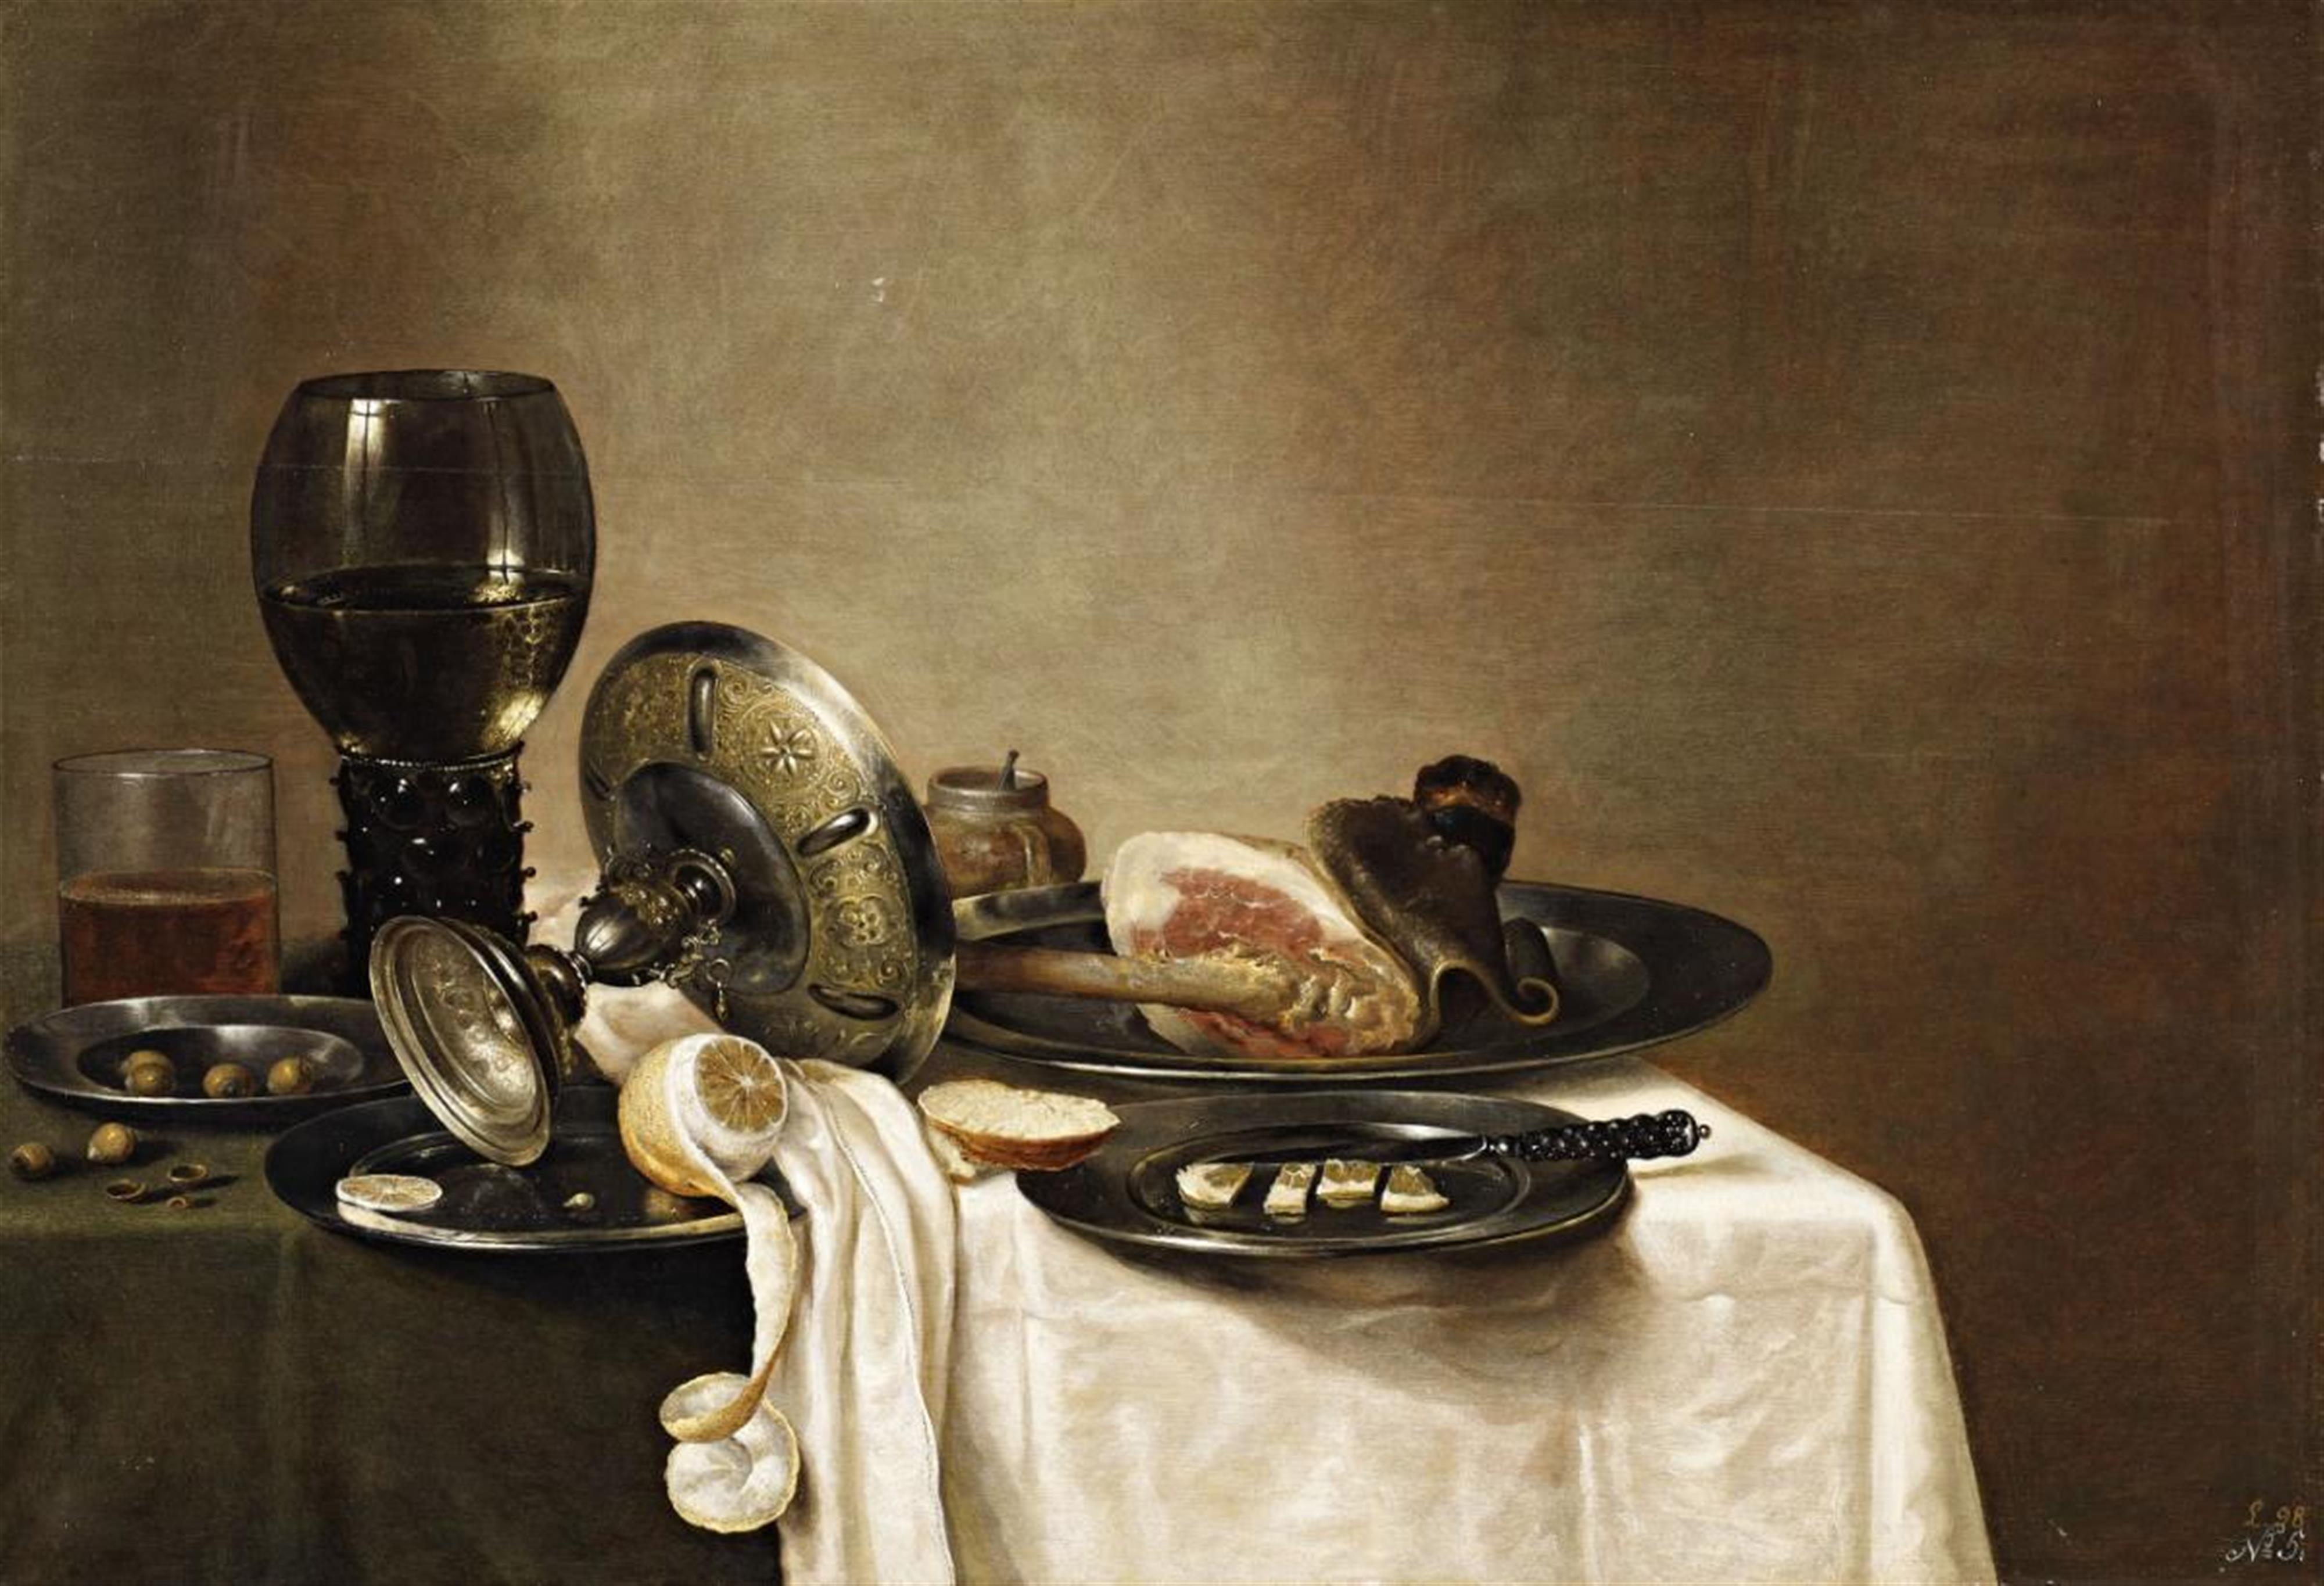 Gerret Willemsz. Heda, studio of - Still Life with a Leg of Lamb, a Peeled Lemon, two Glasses and Pewter Dishes on a Table - image-1